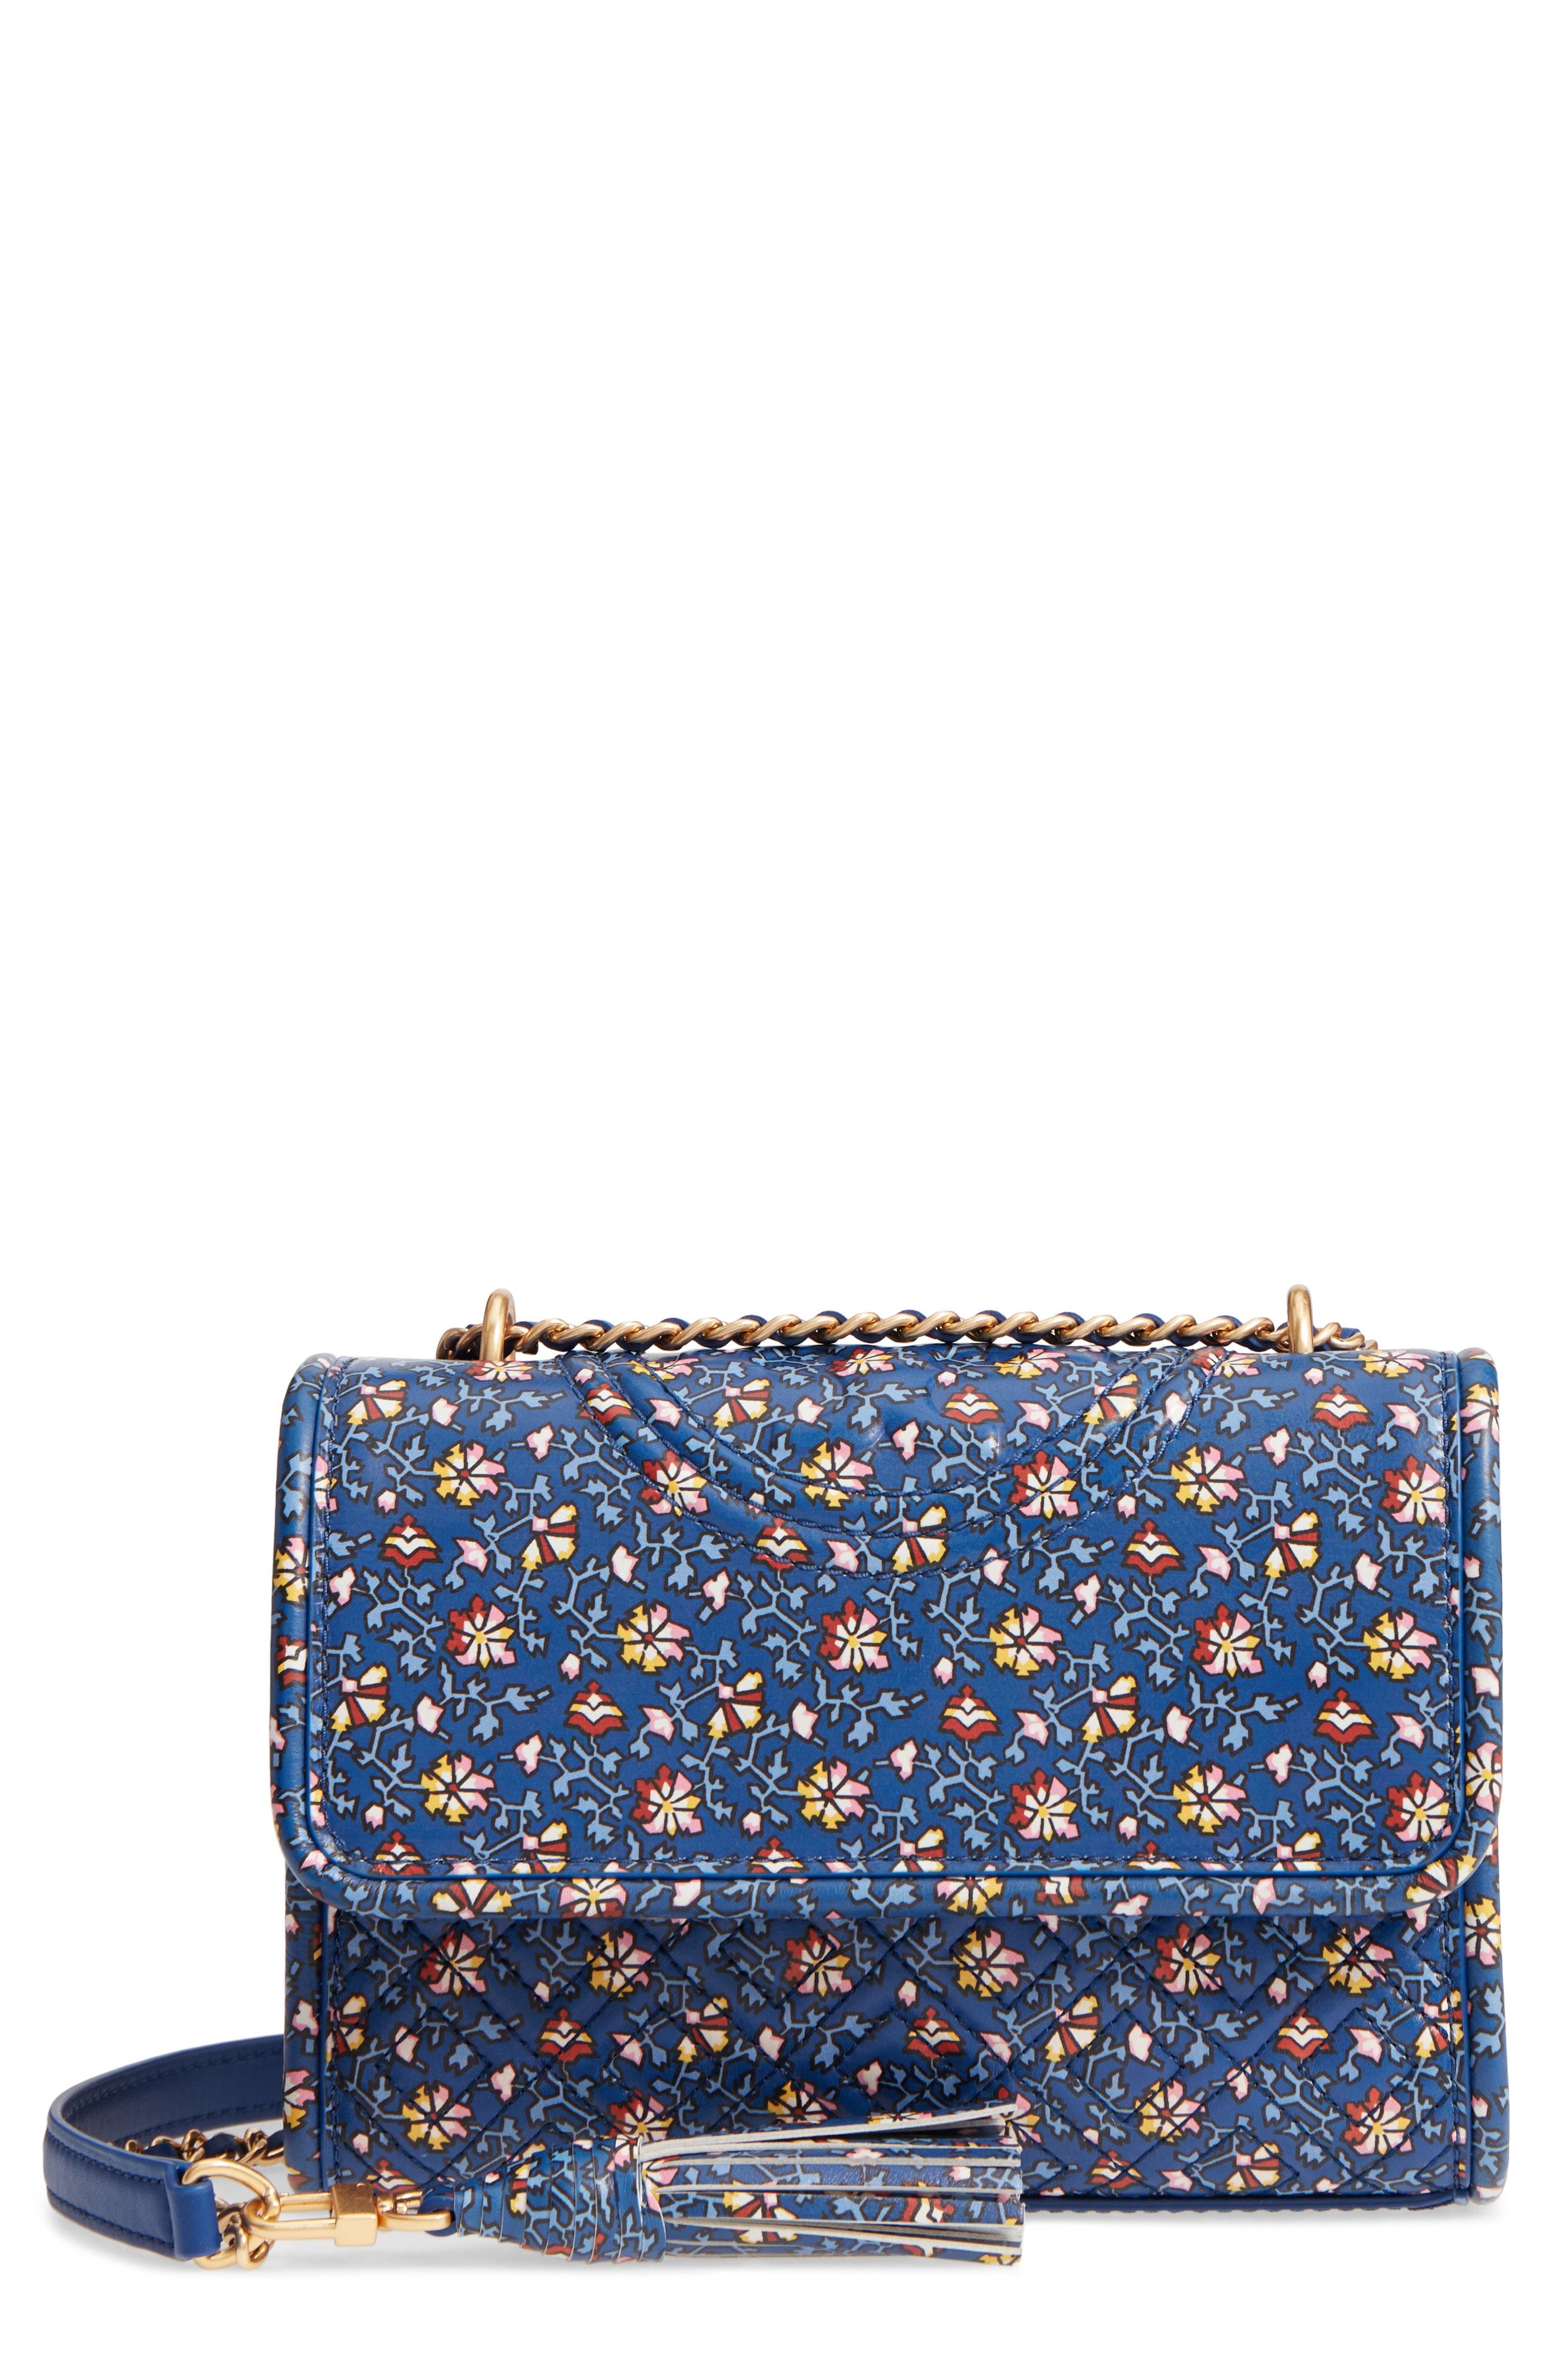 Tory Burch Blue Wild Pansy Floral Fleming Leather Crossbody Bag, Best  Price and Reviews